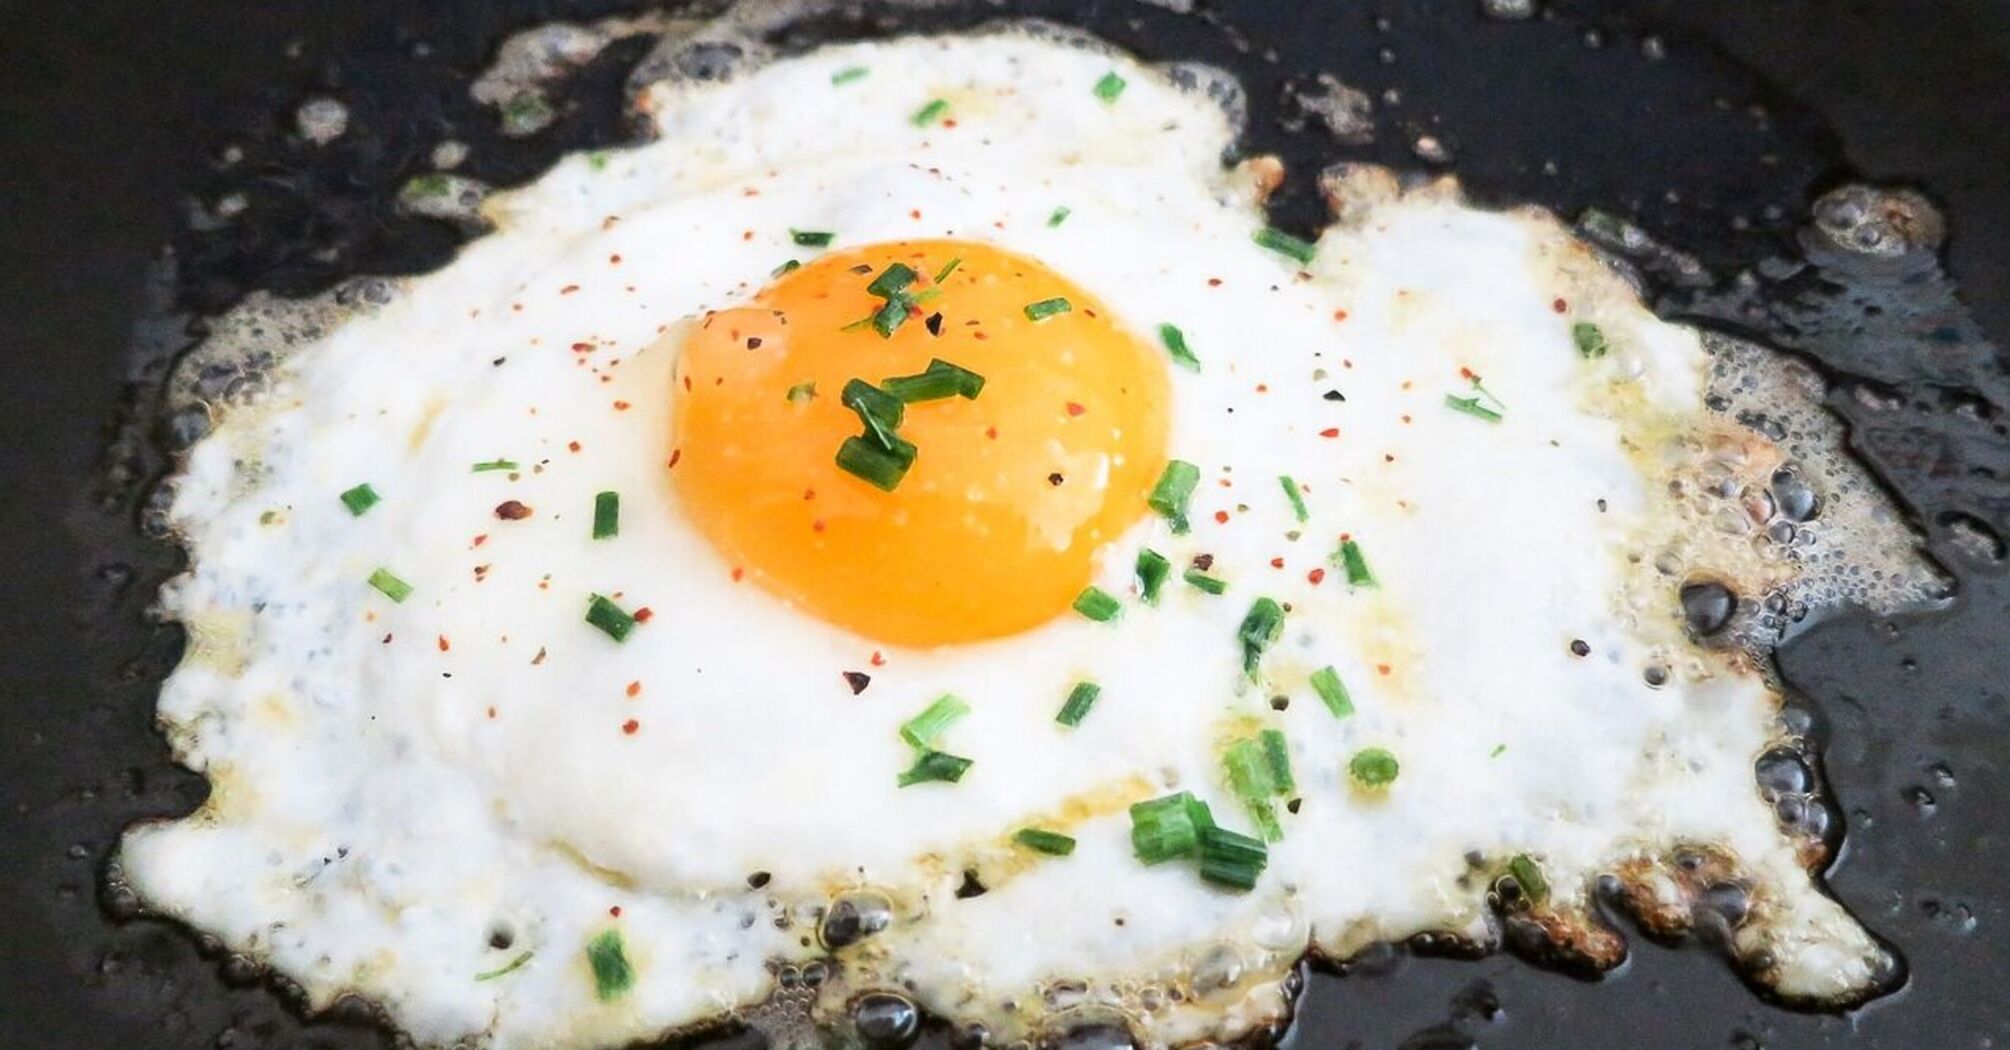 In what form are eggs most useful: we share a recipe for a delicious breakfast dish